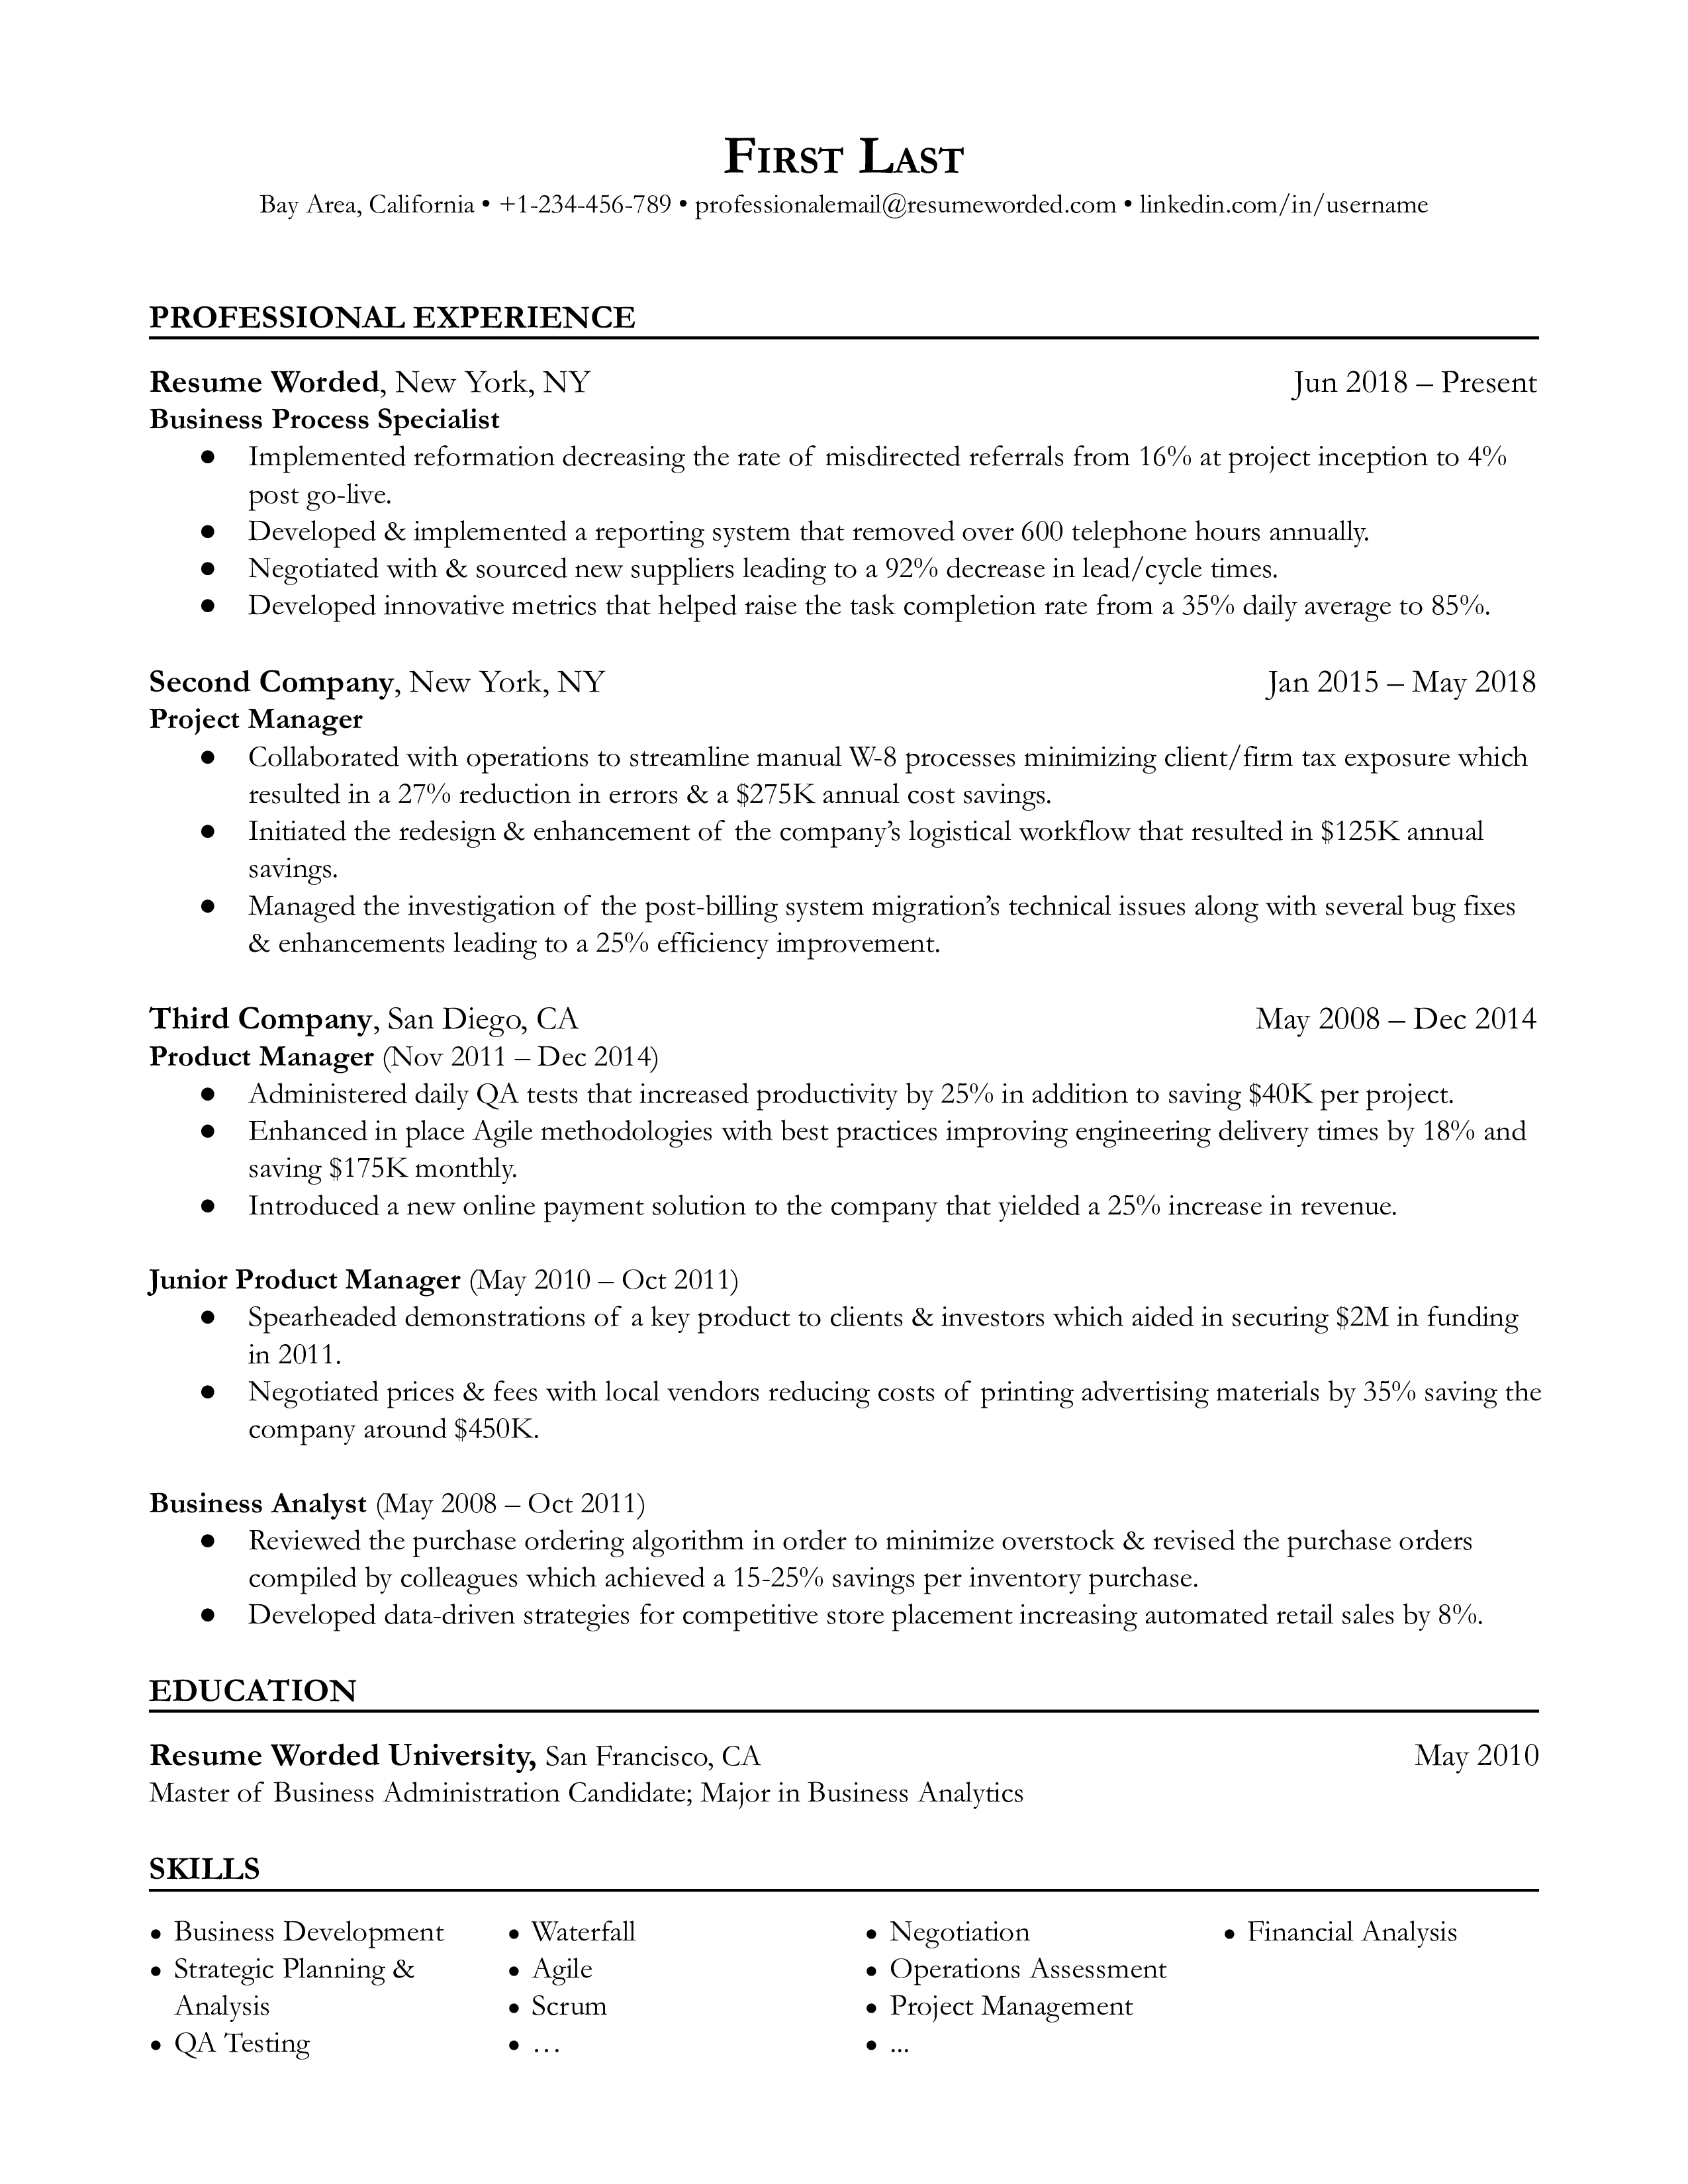 Business Process Specialist Resume Sample